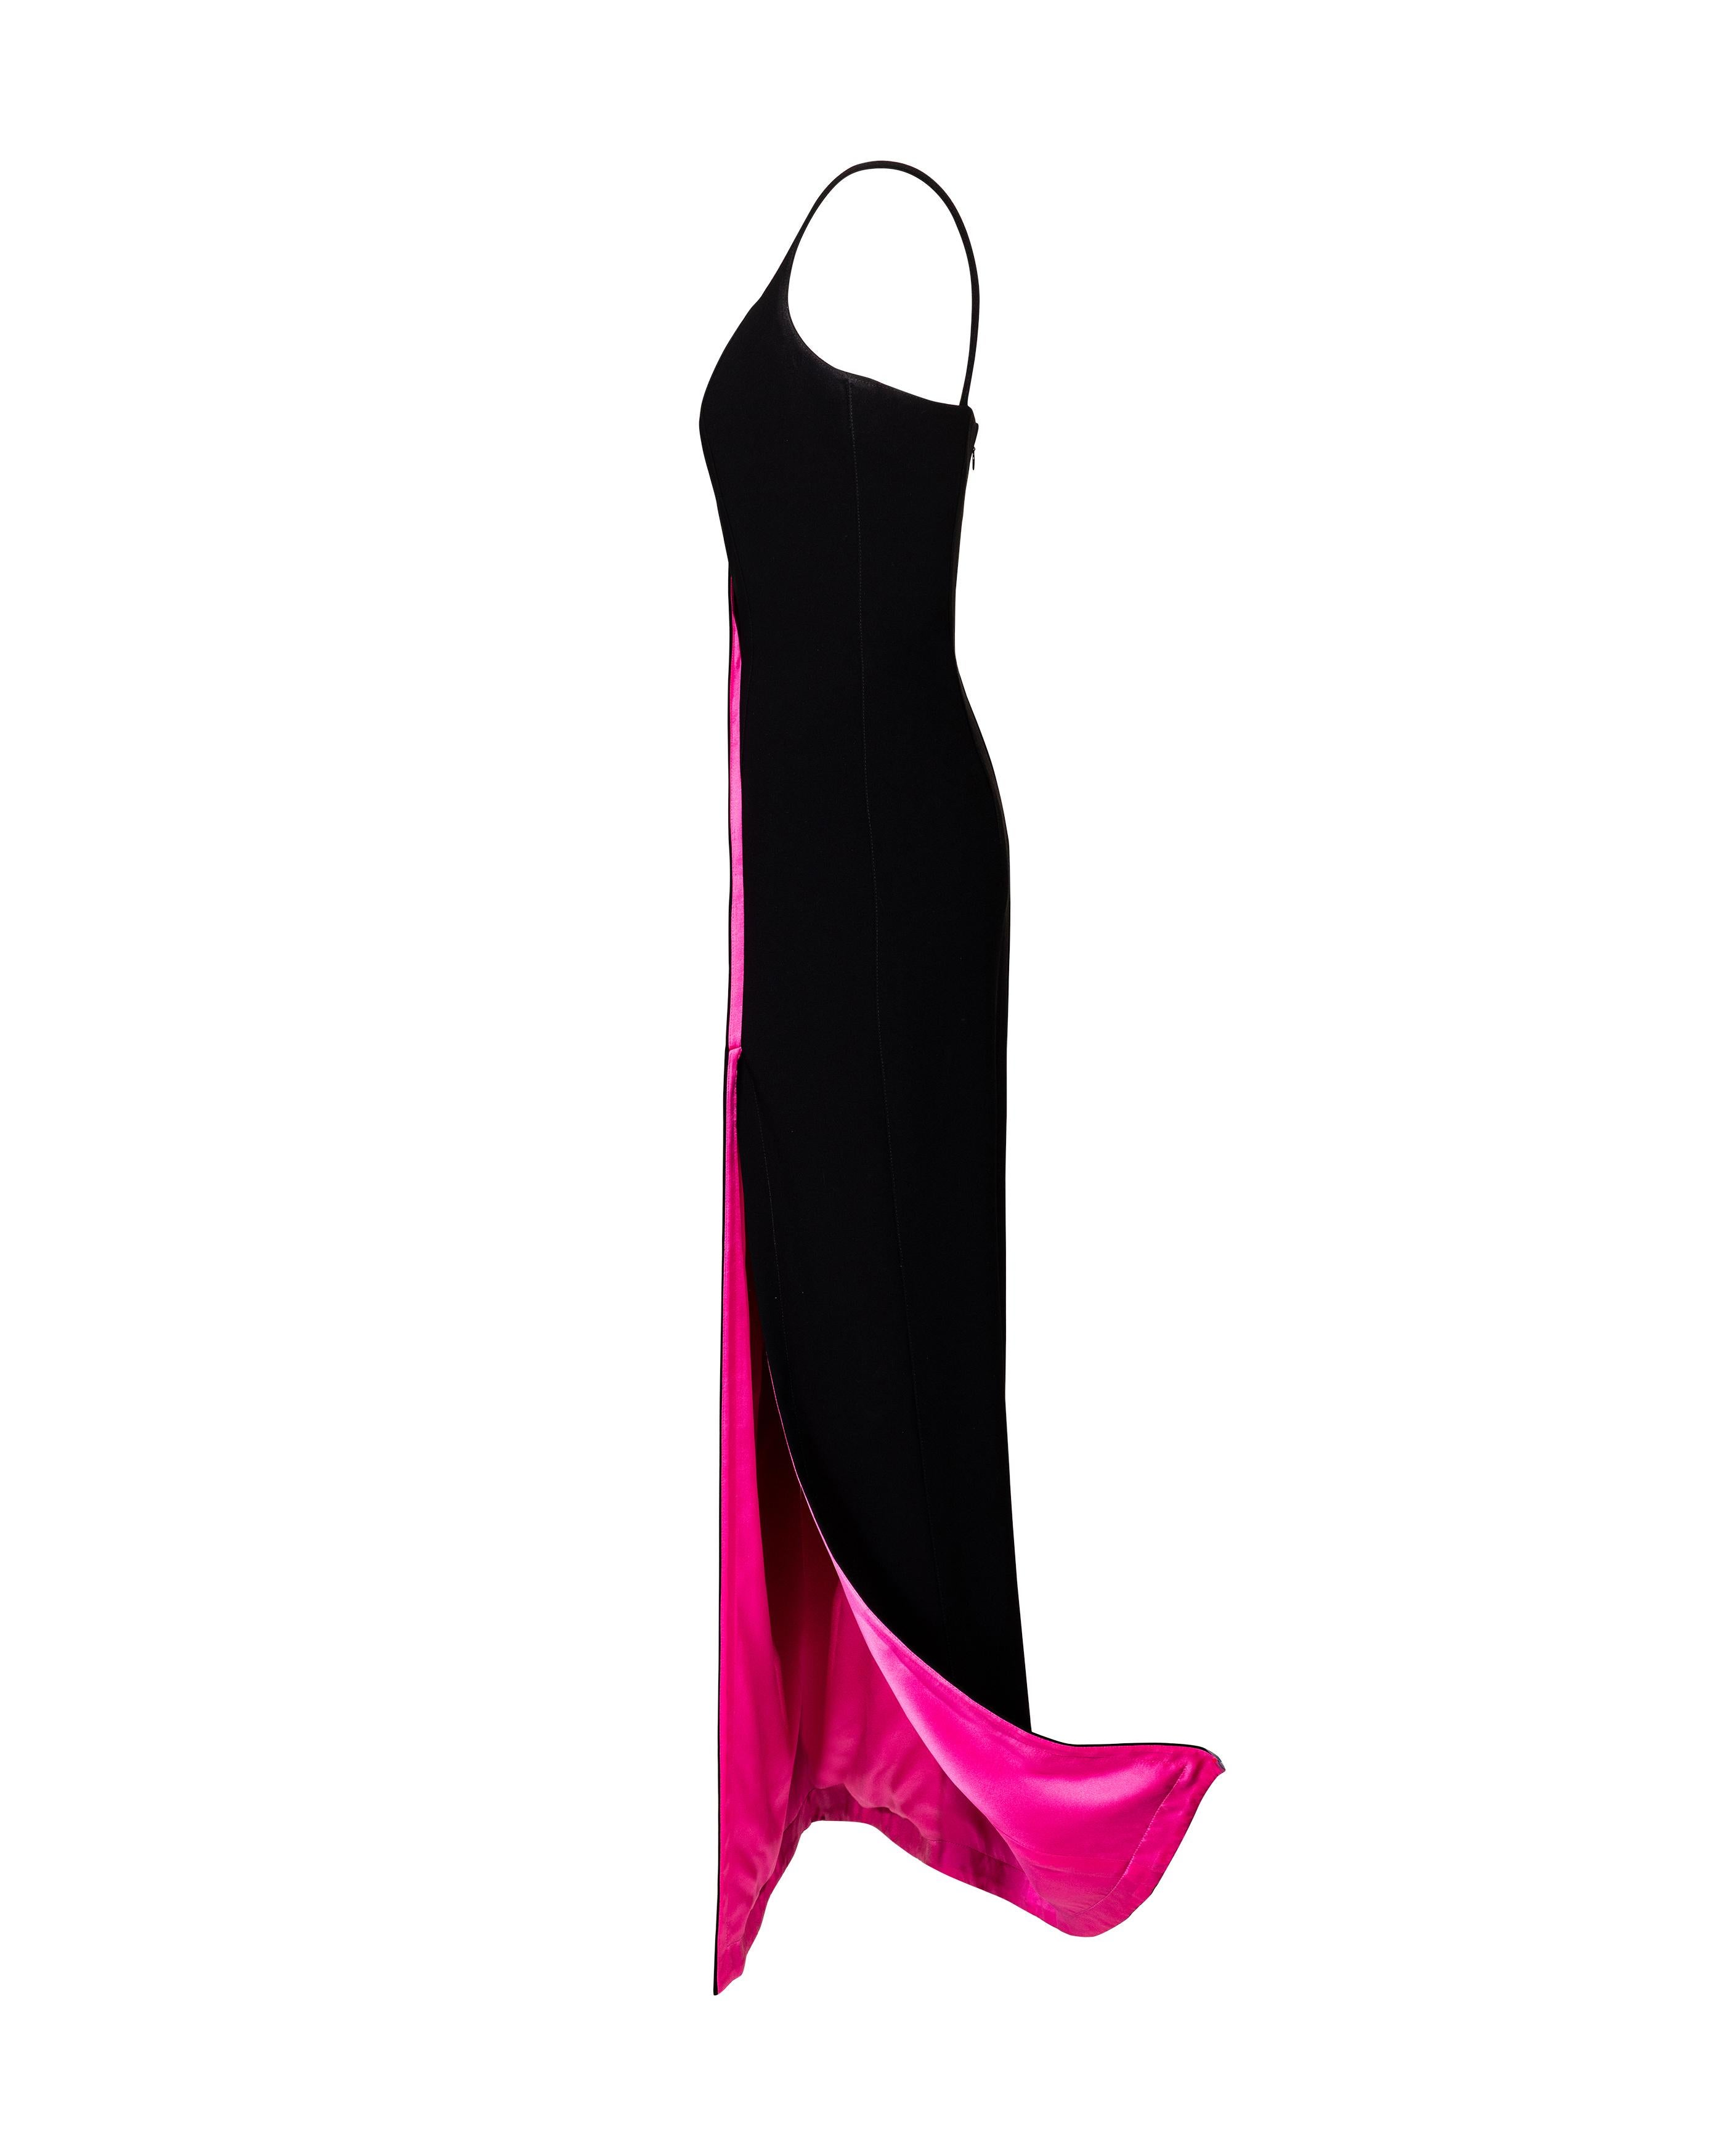 A/W 1999 Thierry Mugler 'Vie en Rose' Collection Black and Pink Gown 1